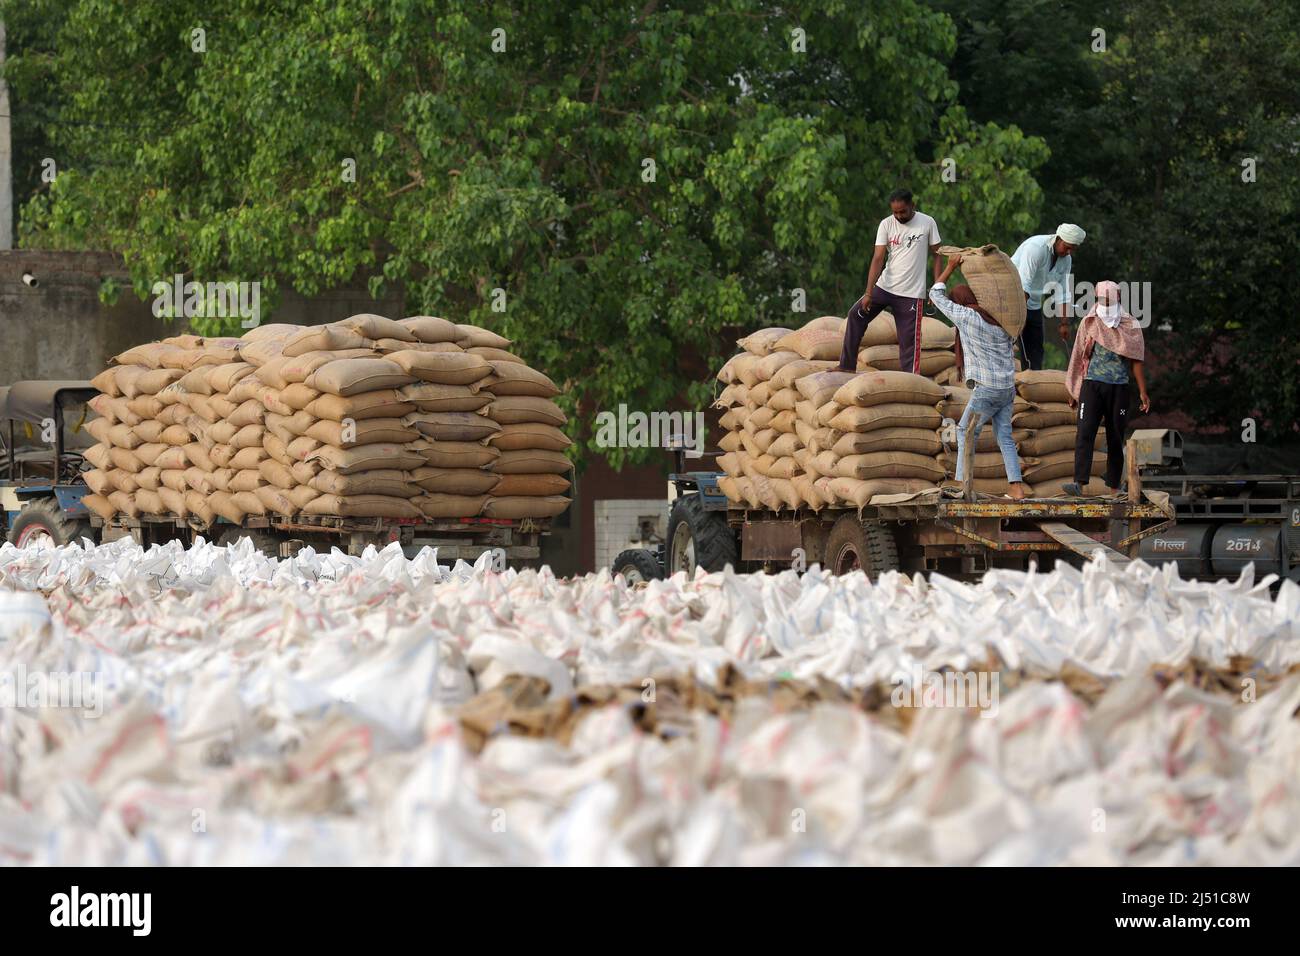 Punjab. 19th Apr, 2022. Workers load bags of wheat on a trolley at a market in Amritsar district of India's northern Punjab state, April 19, 2022. Credit: Str/Xinhua/Alamy Live News Stock Photo